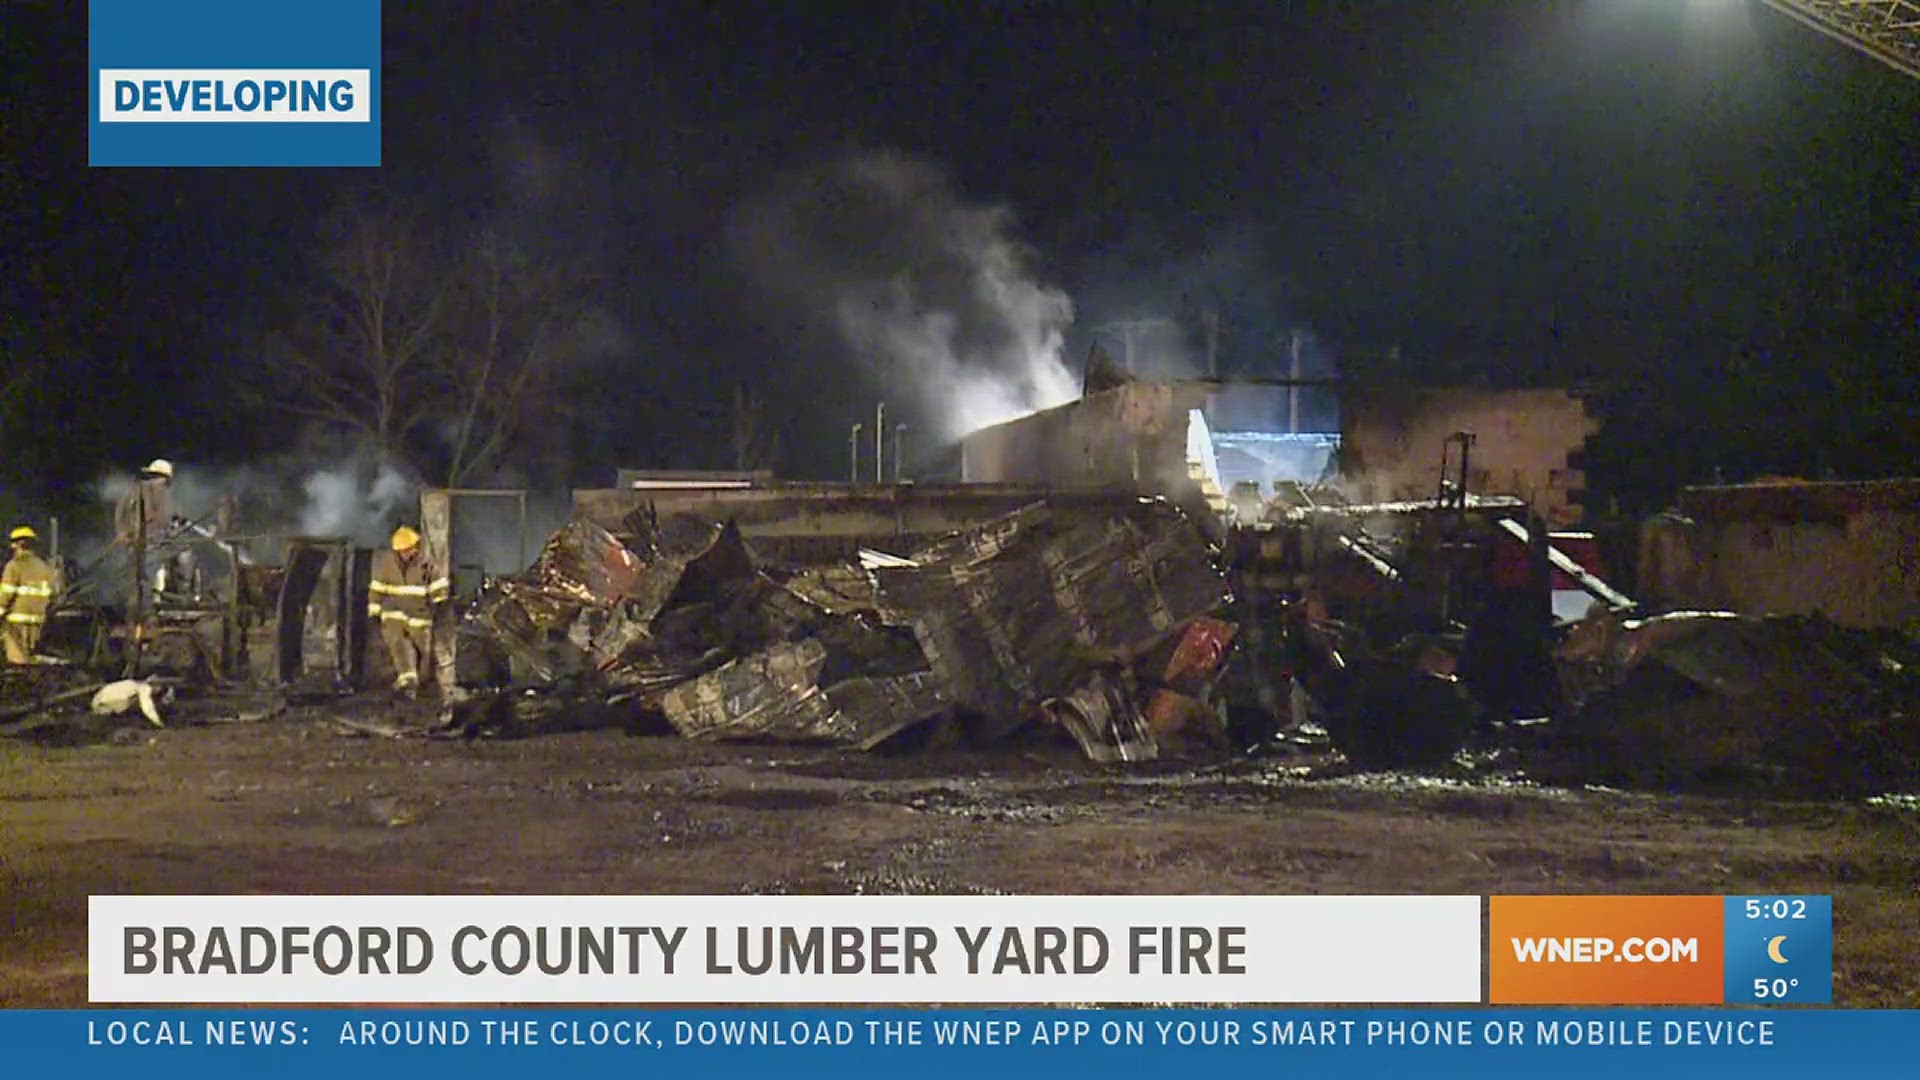 CC Allis &Sons lumber yard destroyed in a fire late Monday evening